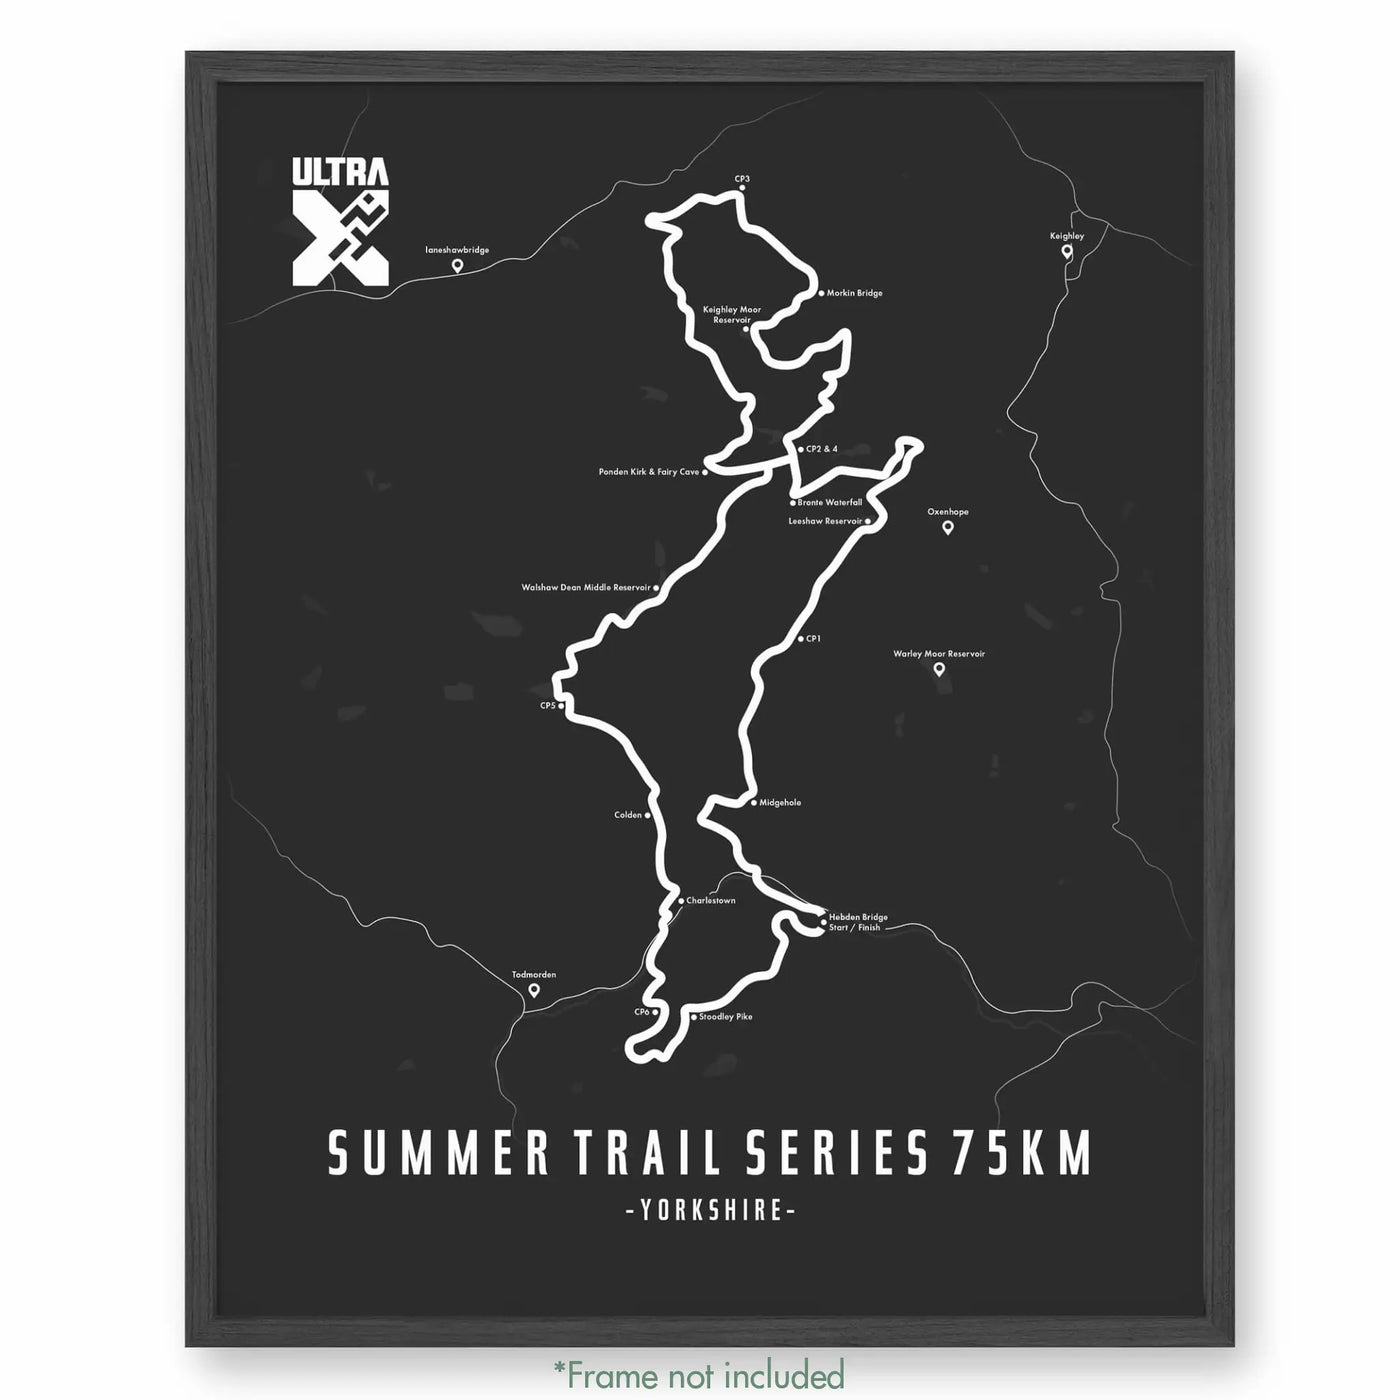 Trail Poster of Ultra X Summer Trail Series 75km - Grey